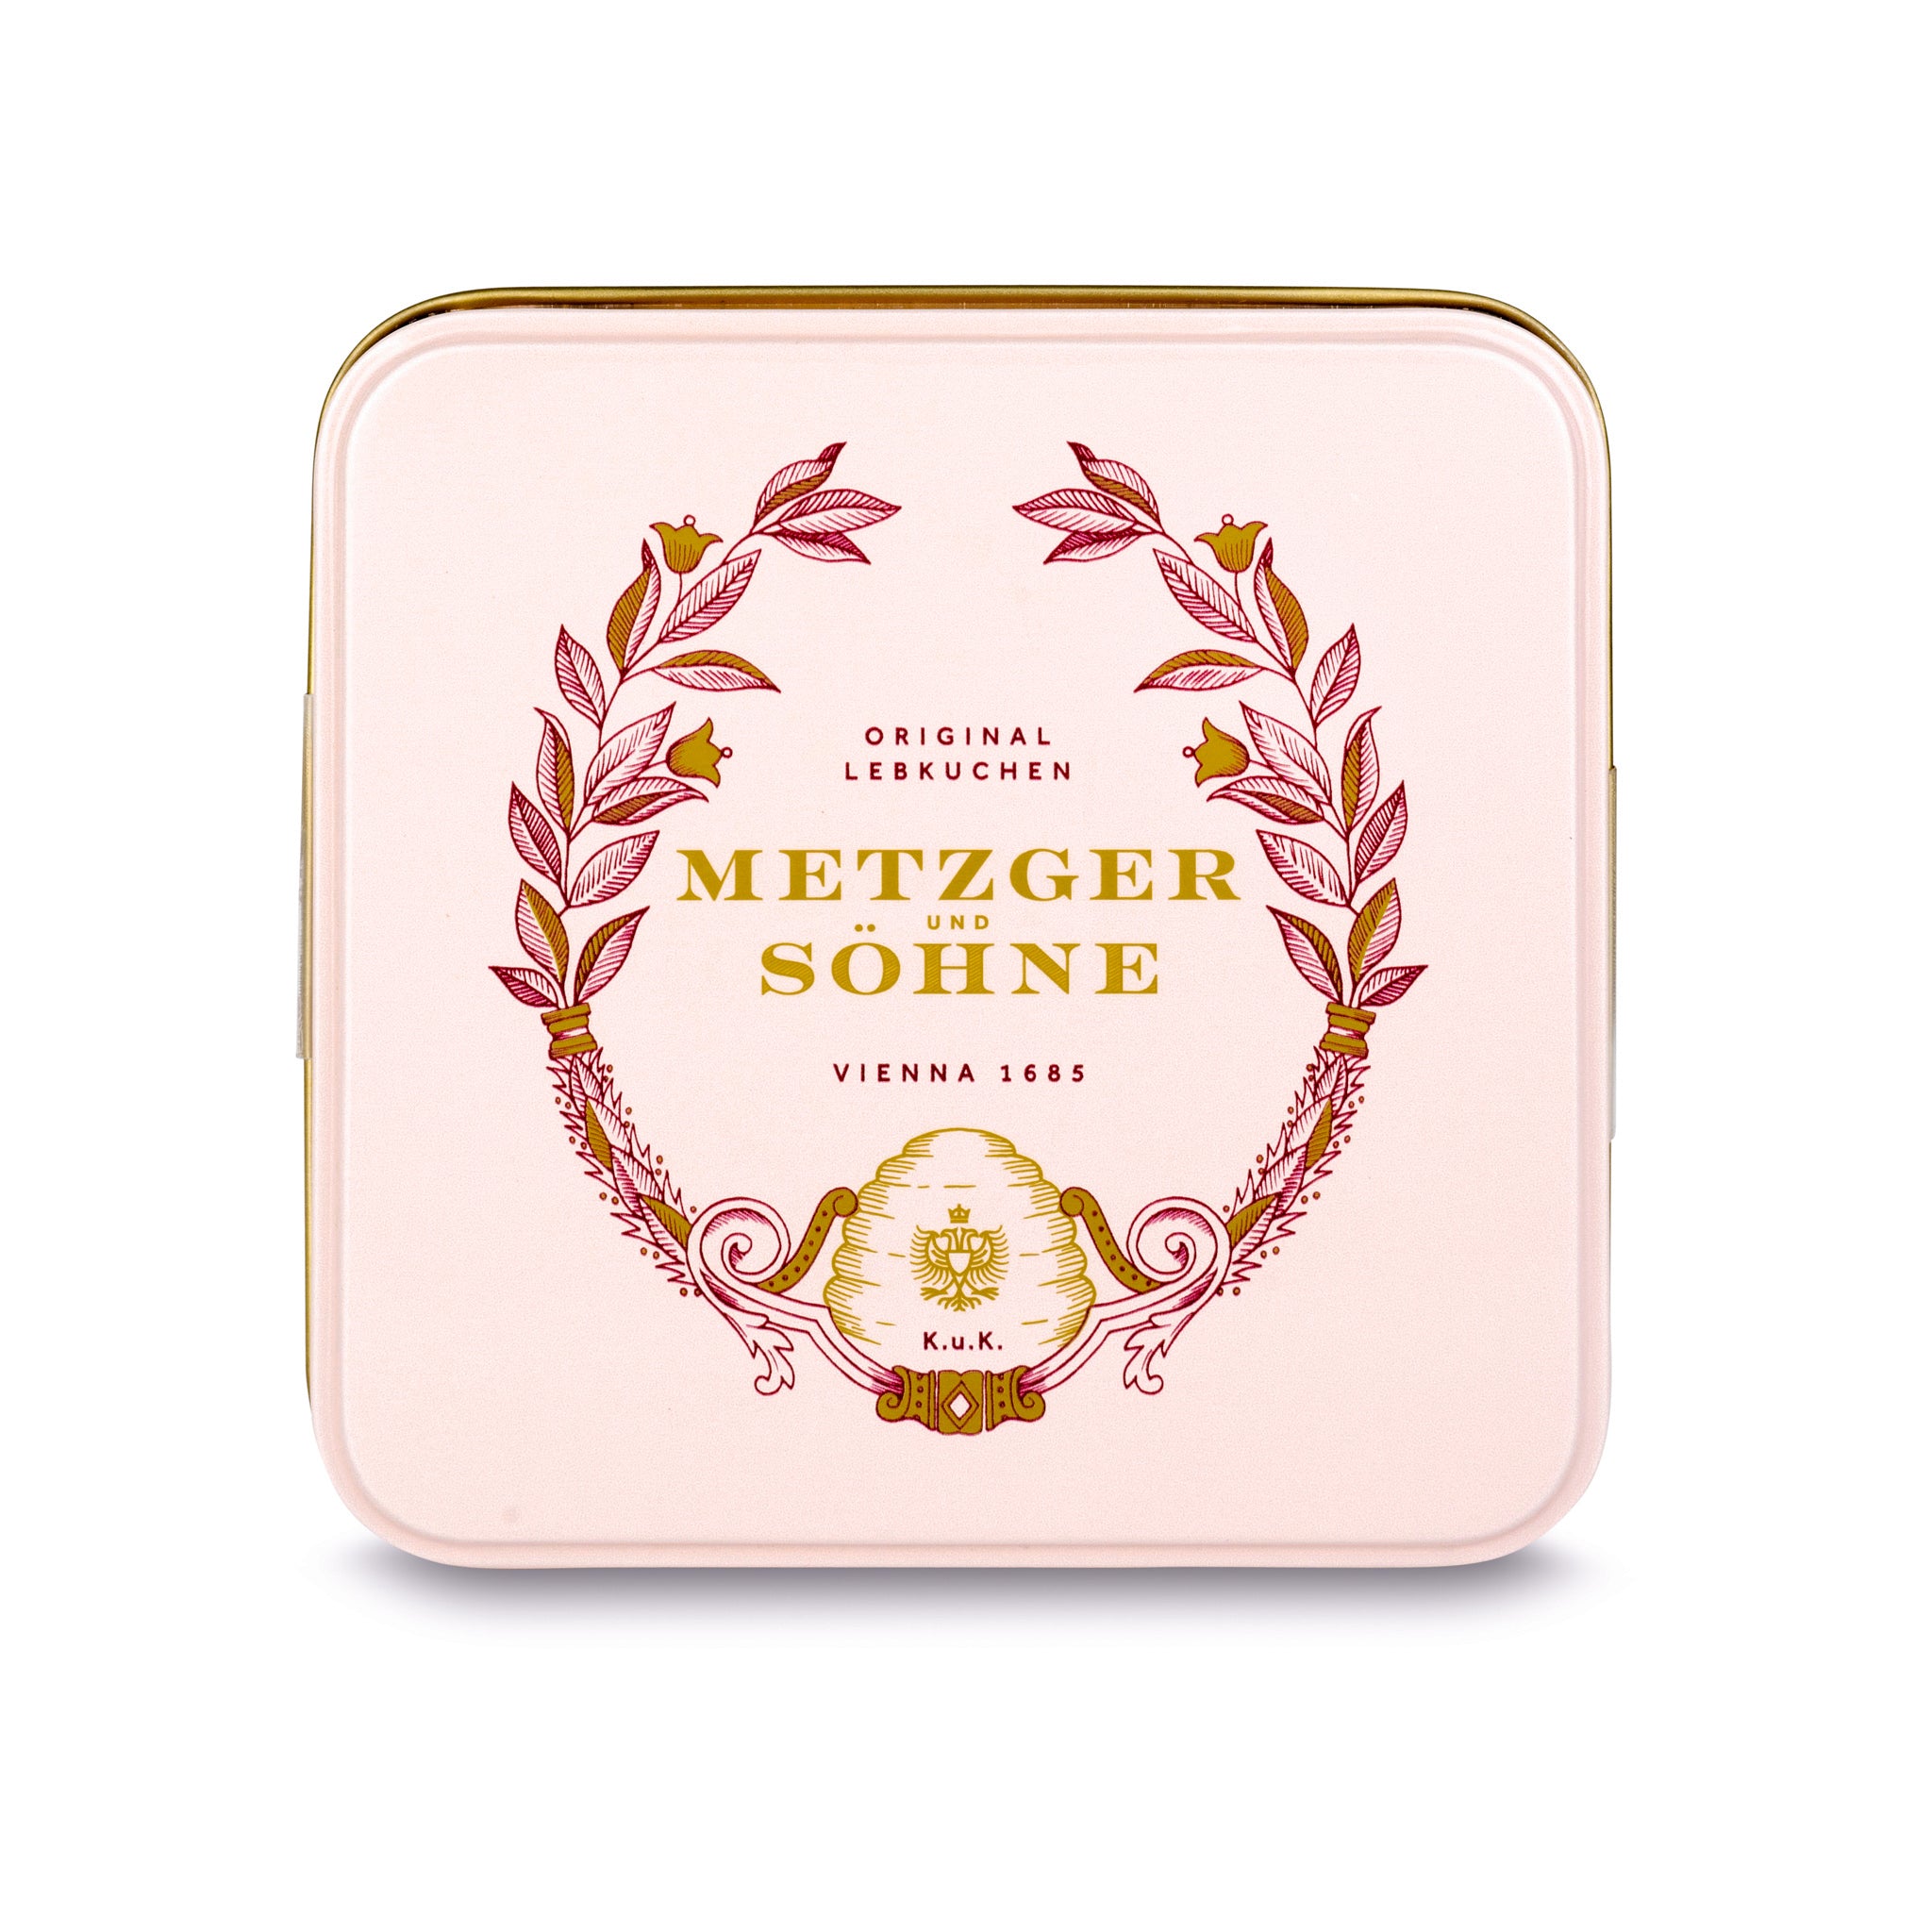 A perfect gift for a special occasion. Metzger's signature luxury tin in delicate pink, filled with with 9 delectable Lebkuchen chocolate pralines. Each praline is layered with Lebkuchen 'honey cake' and filled with marzipan, nuts or fruit jams and jellies, encased in rich chocolate. Suitable for vegetarians.